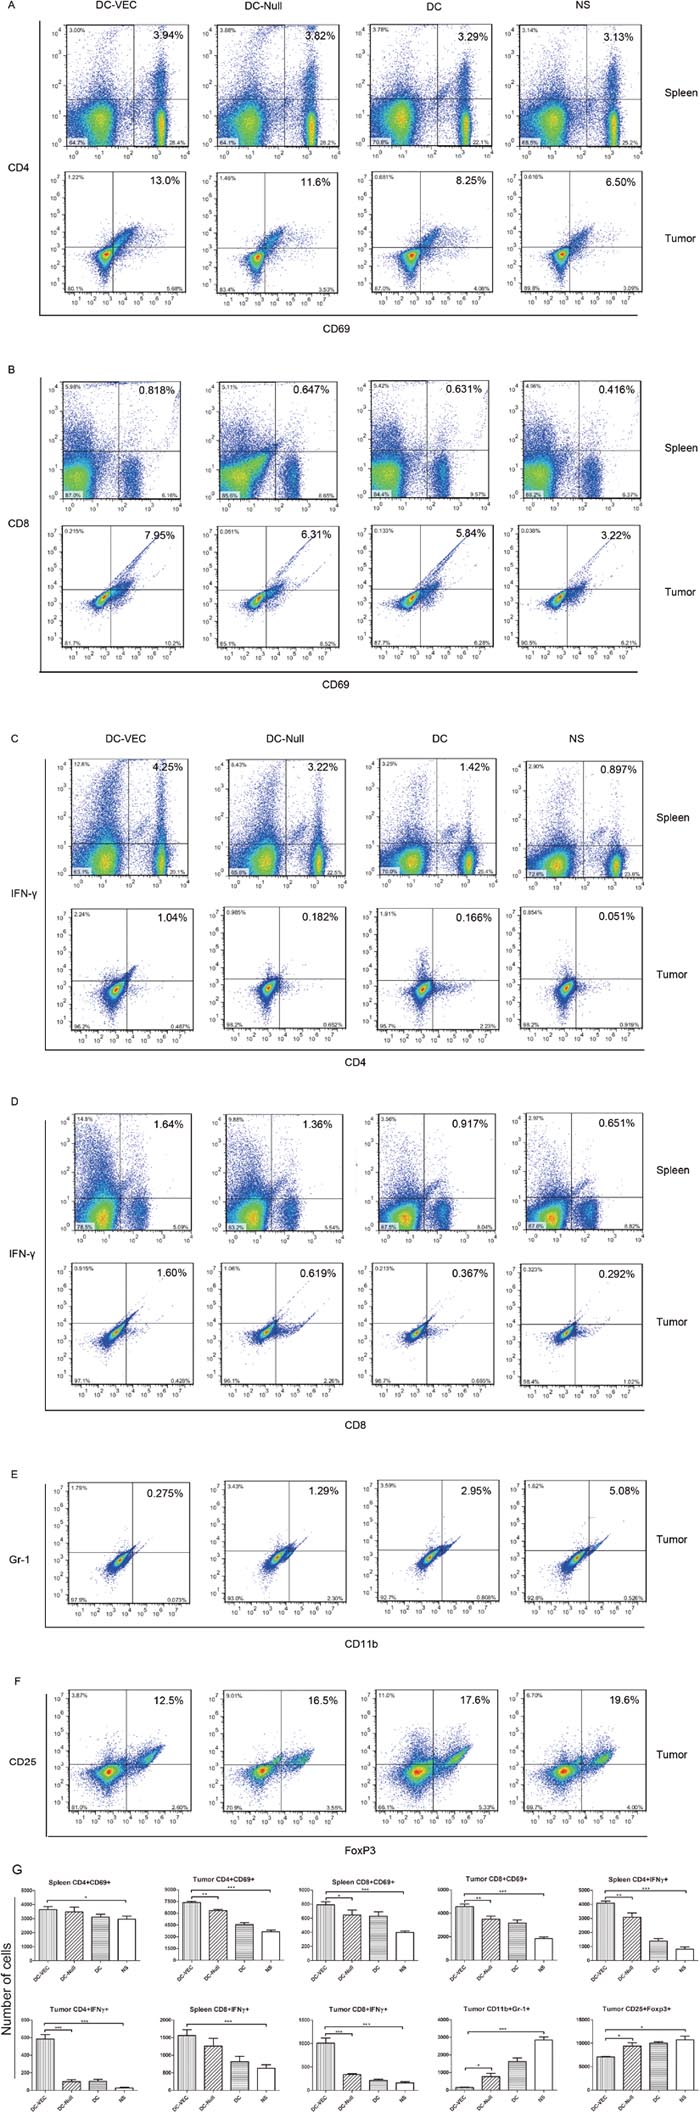 Analyses of activated lymphocytes and IFN-&#x03B3; by flow cytometry.